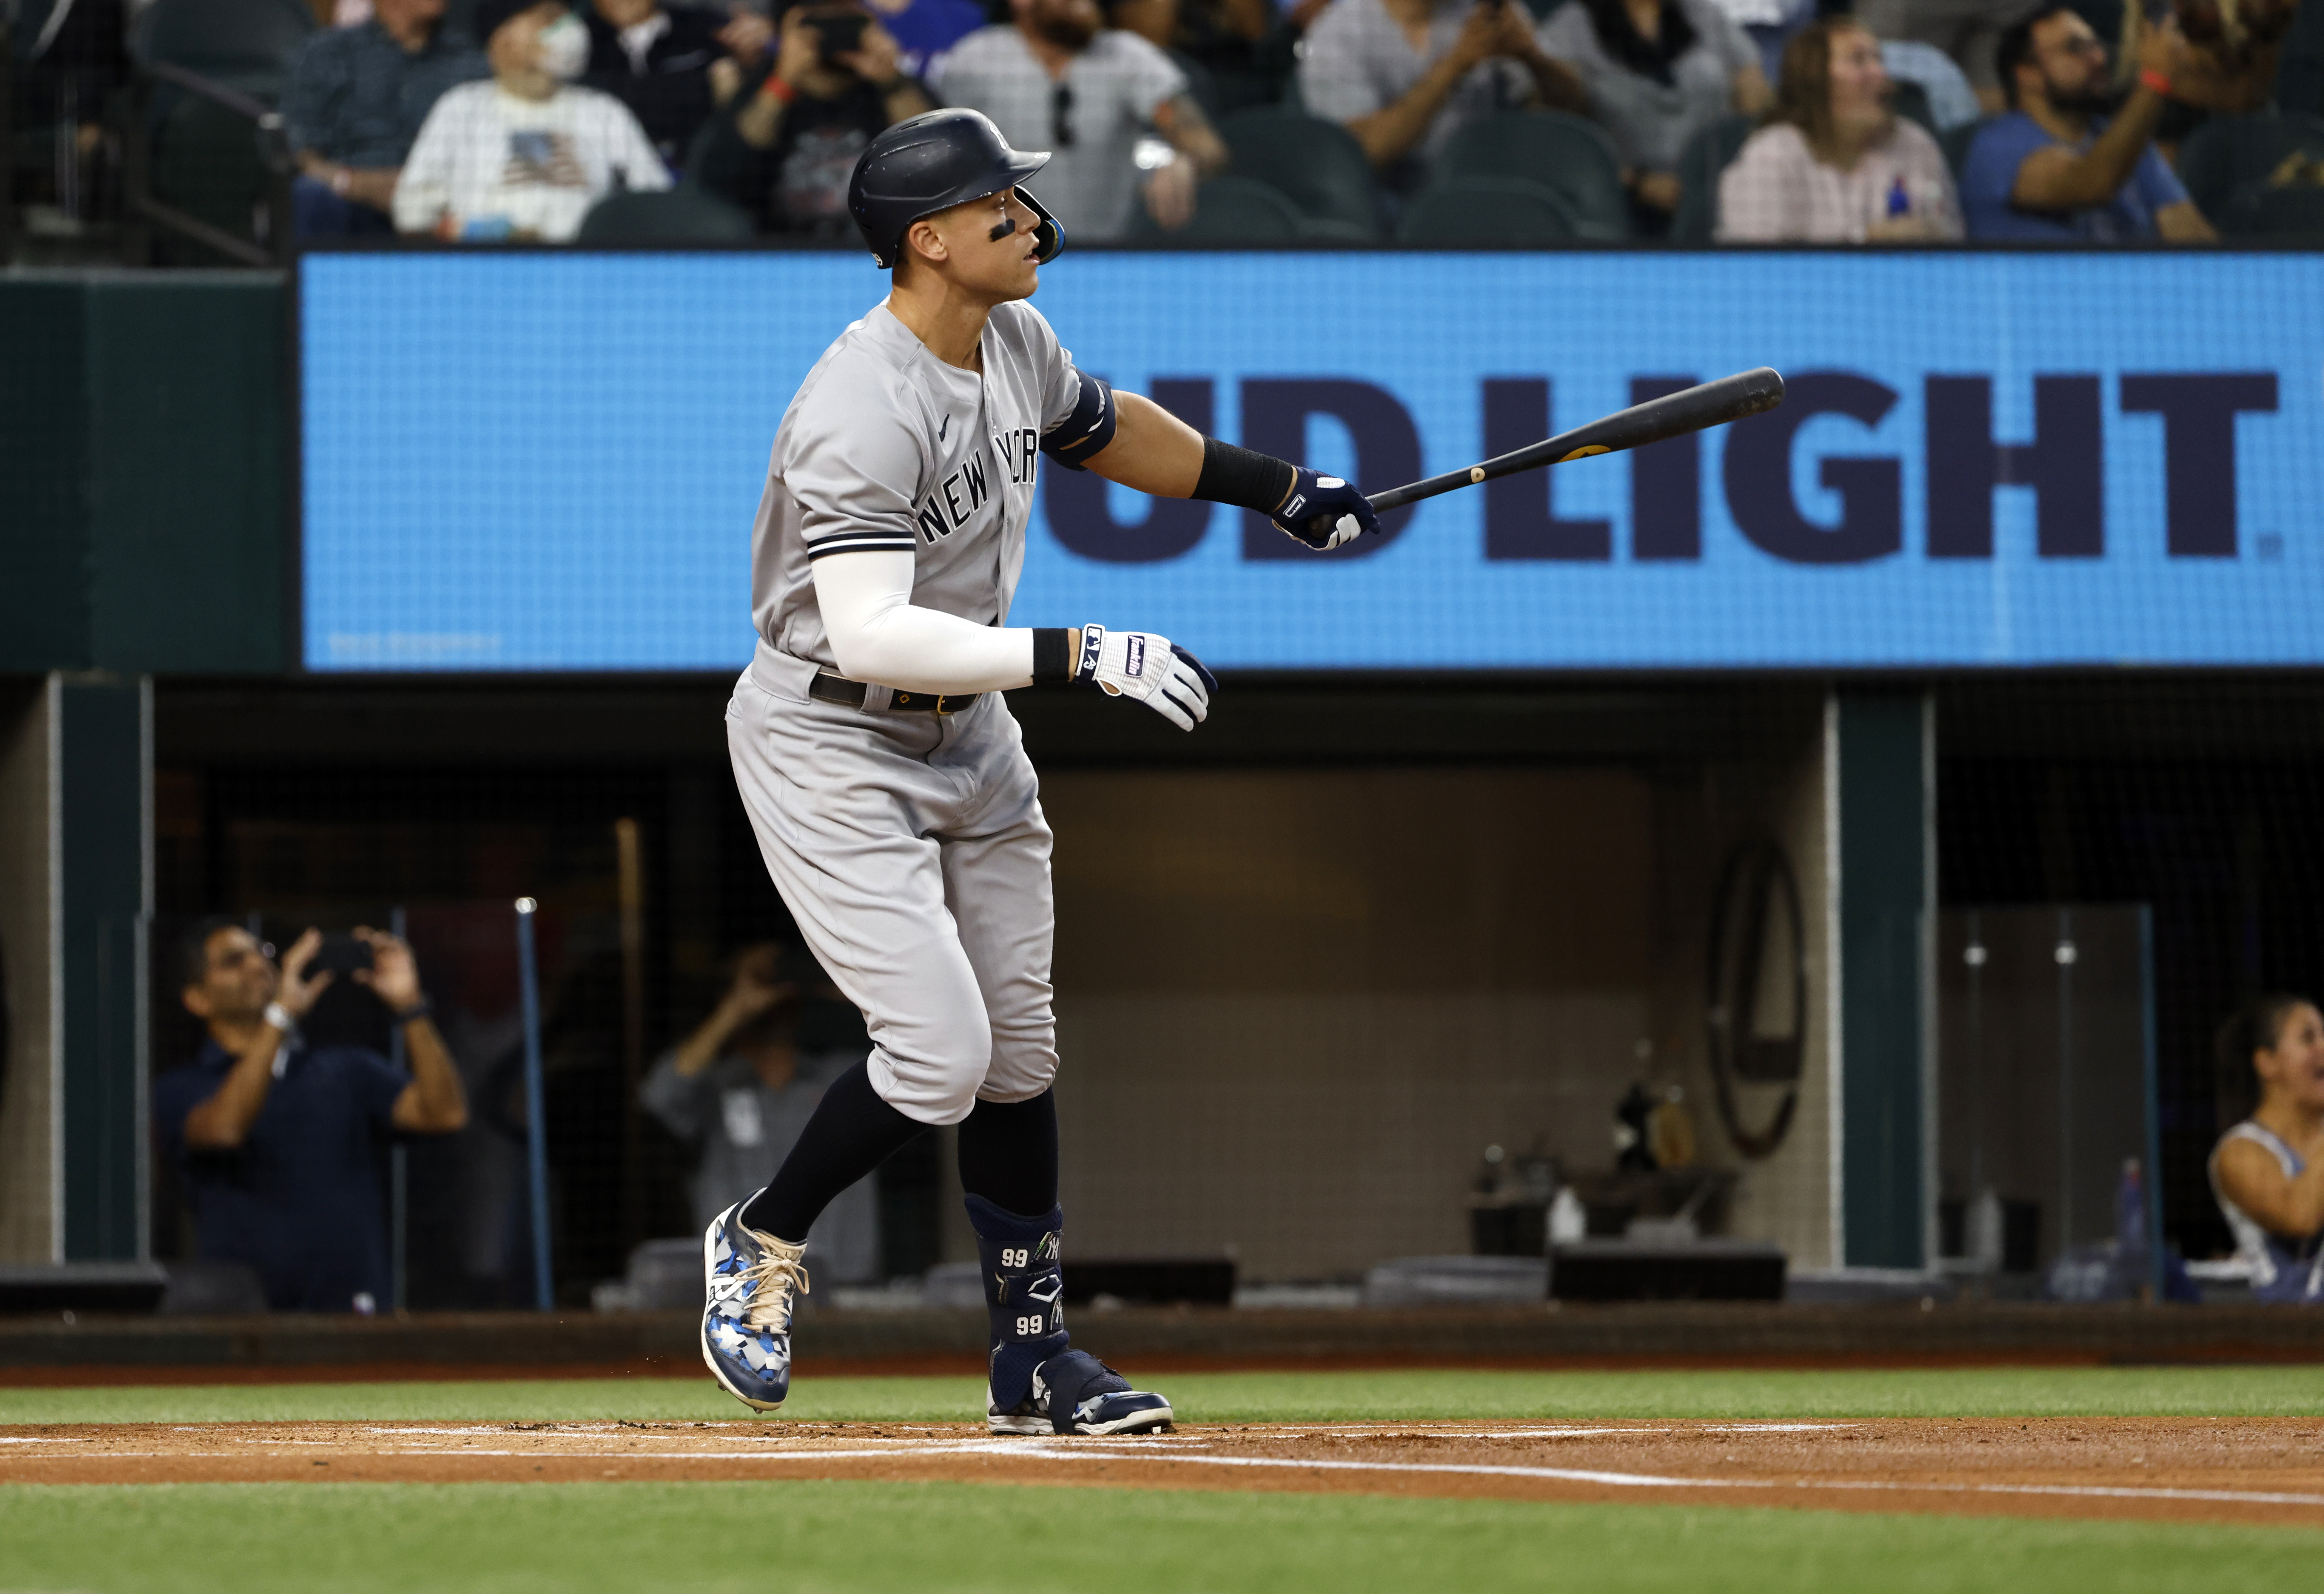 The Yankees are desperate for Aaron Judge to hit home run no. 62